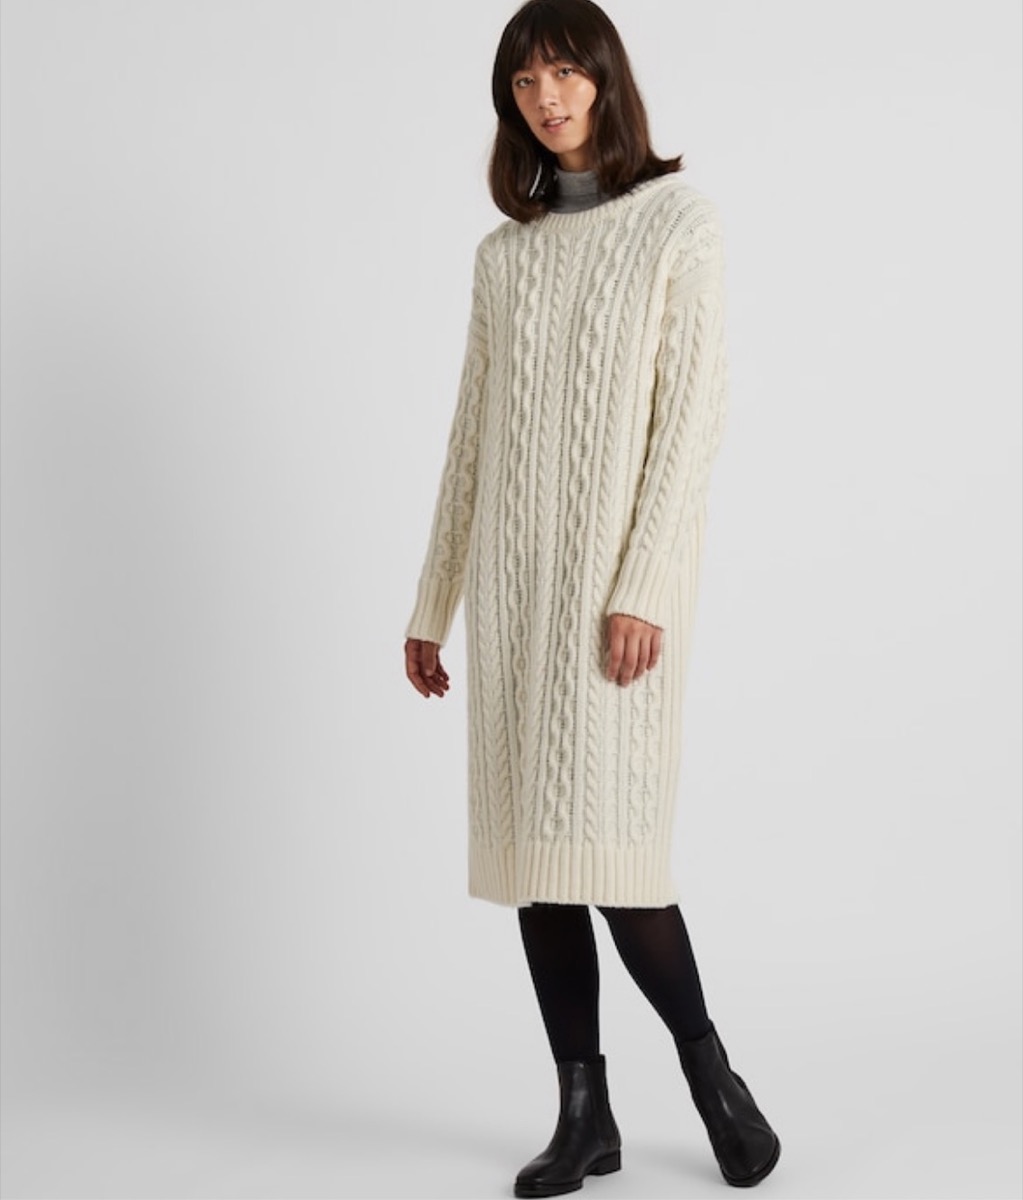 woman wearing cream colored sweater dress and black tights, fall dresses